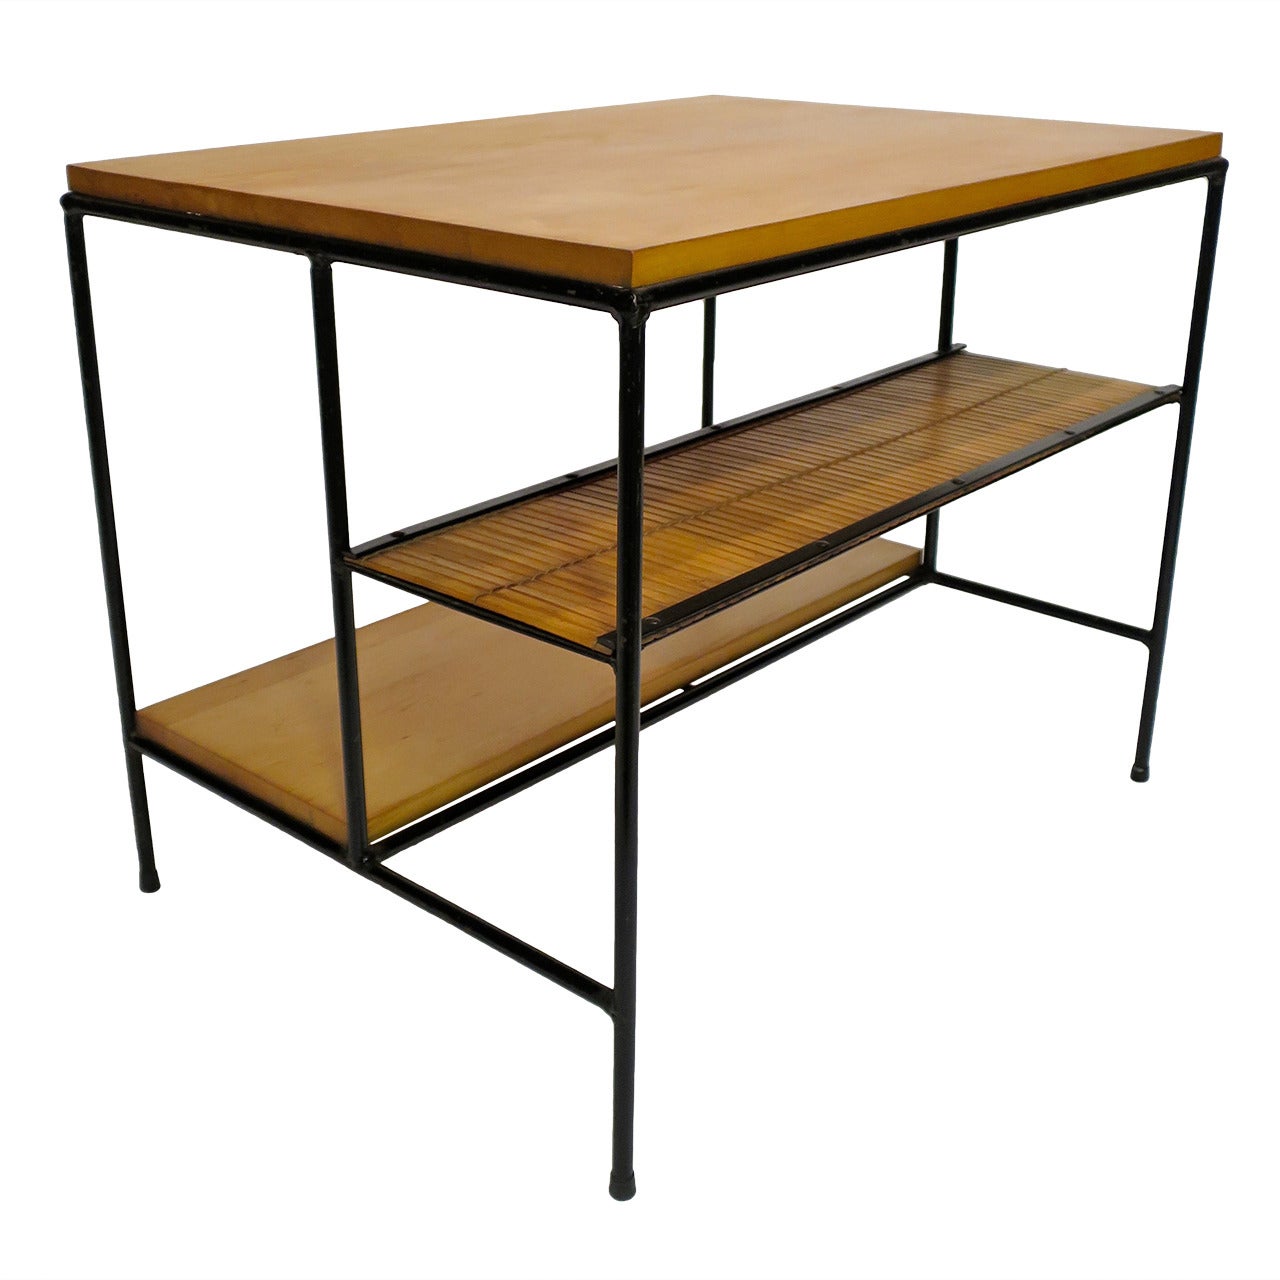 Paul McCobb Planner Group Iron and Wood Table